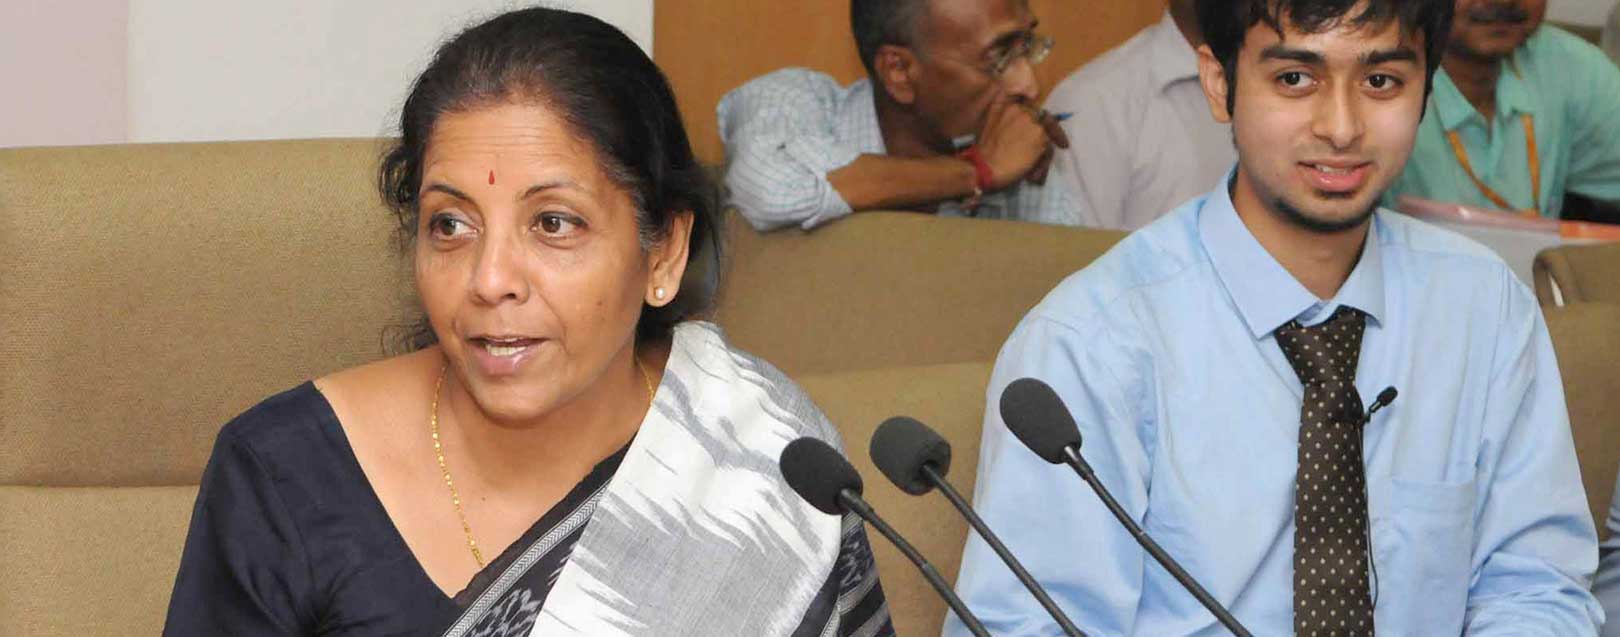 IPR policy gives clarity to US, others: Sitharaman